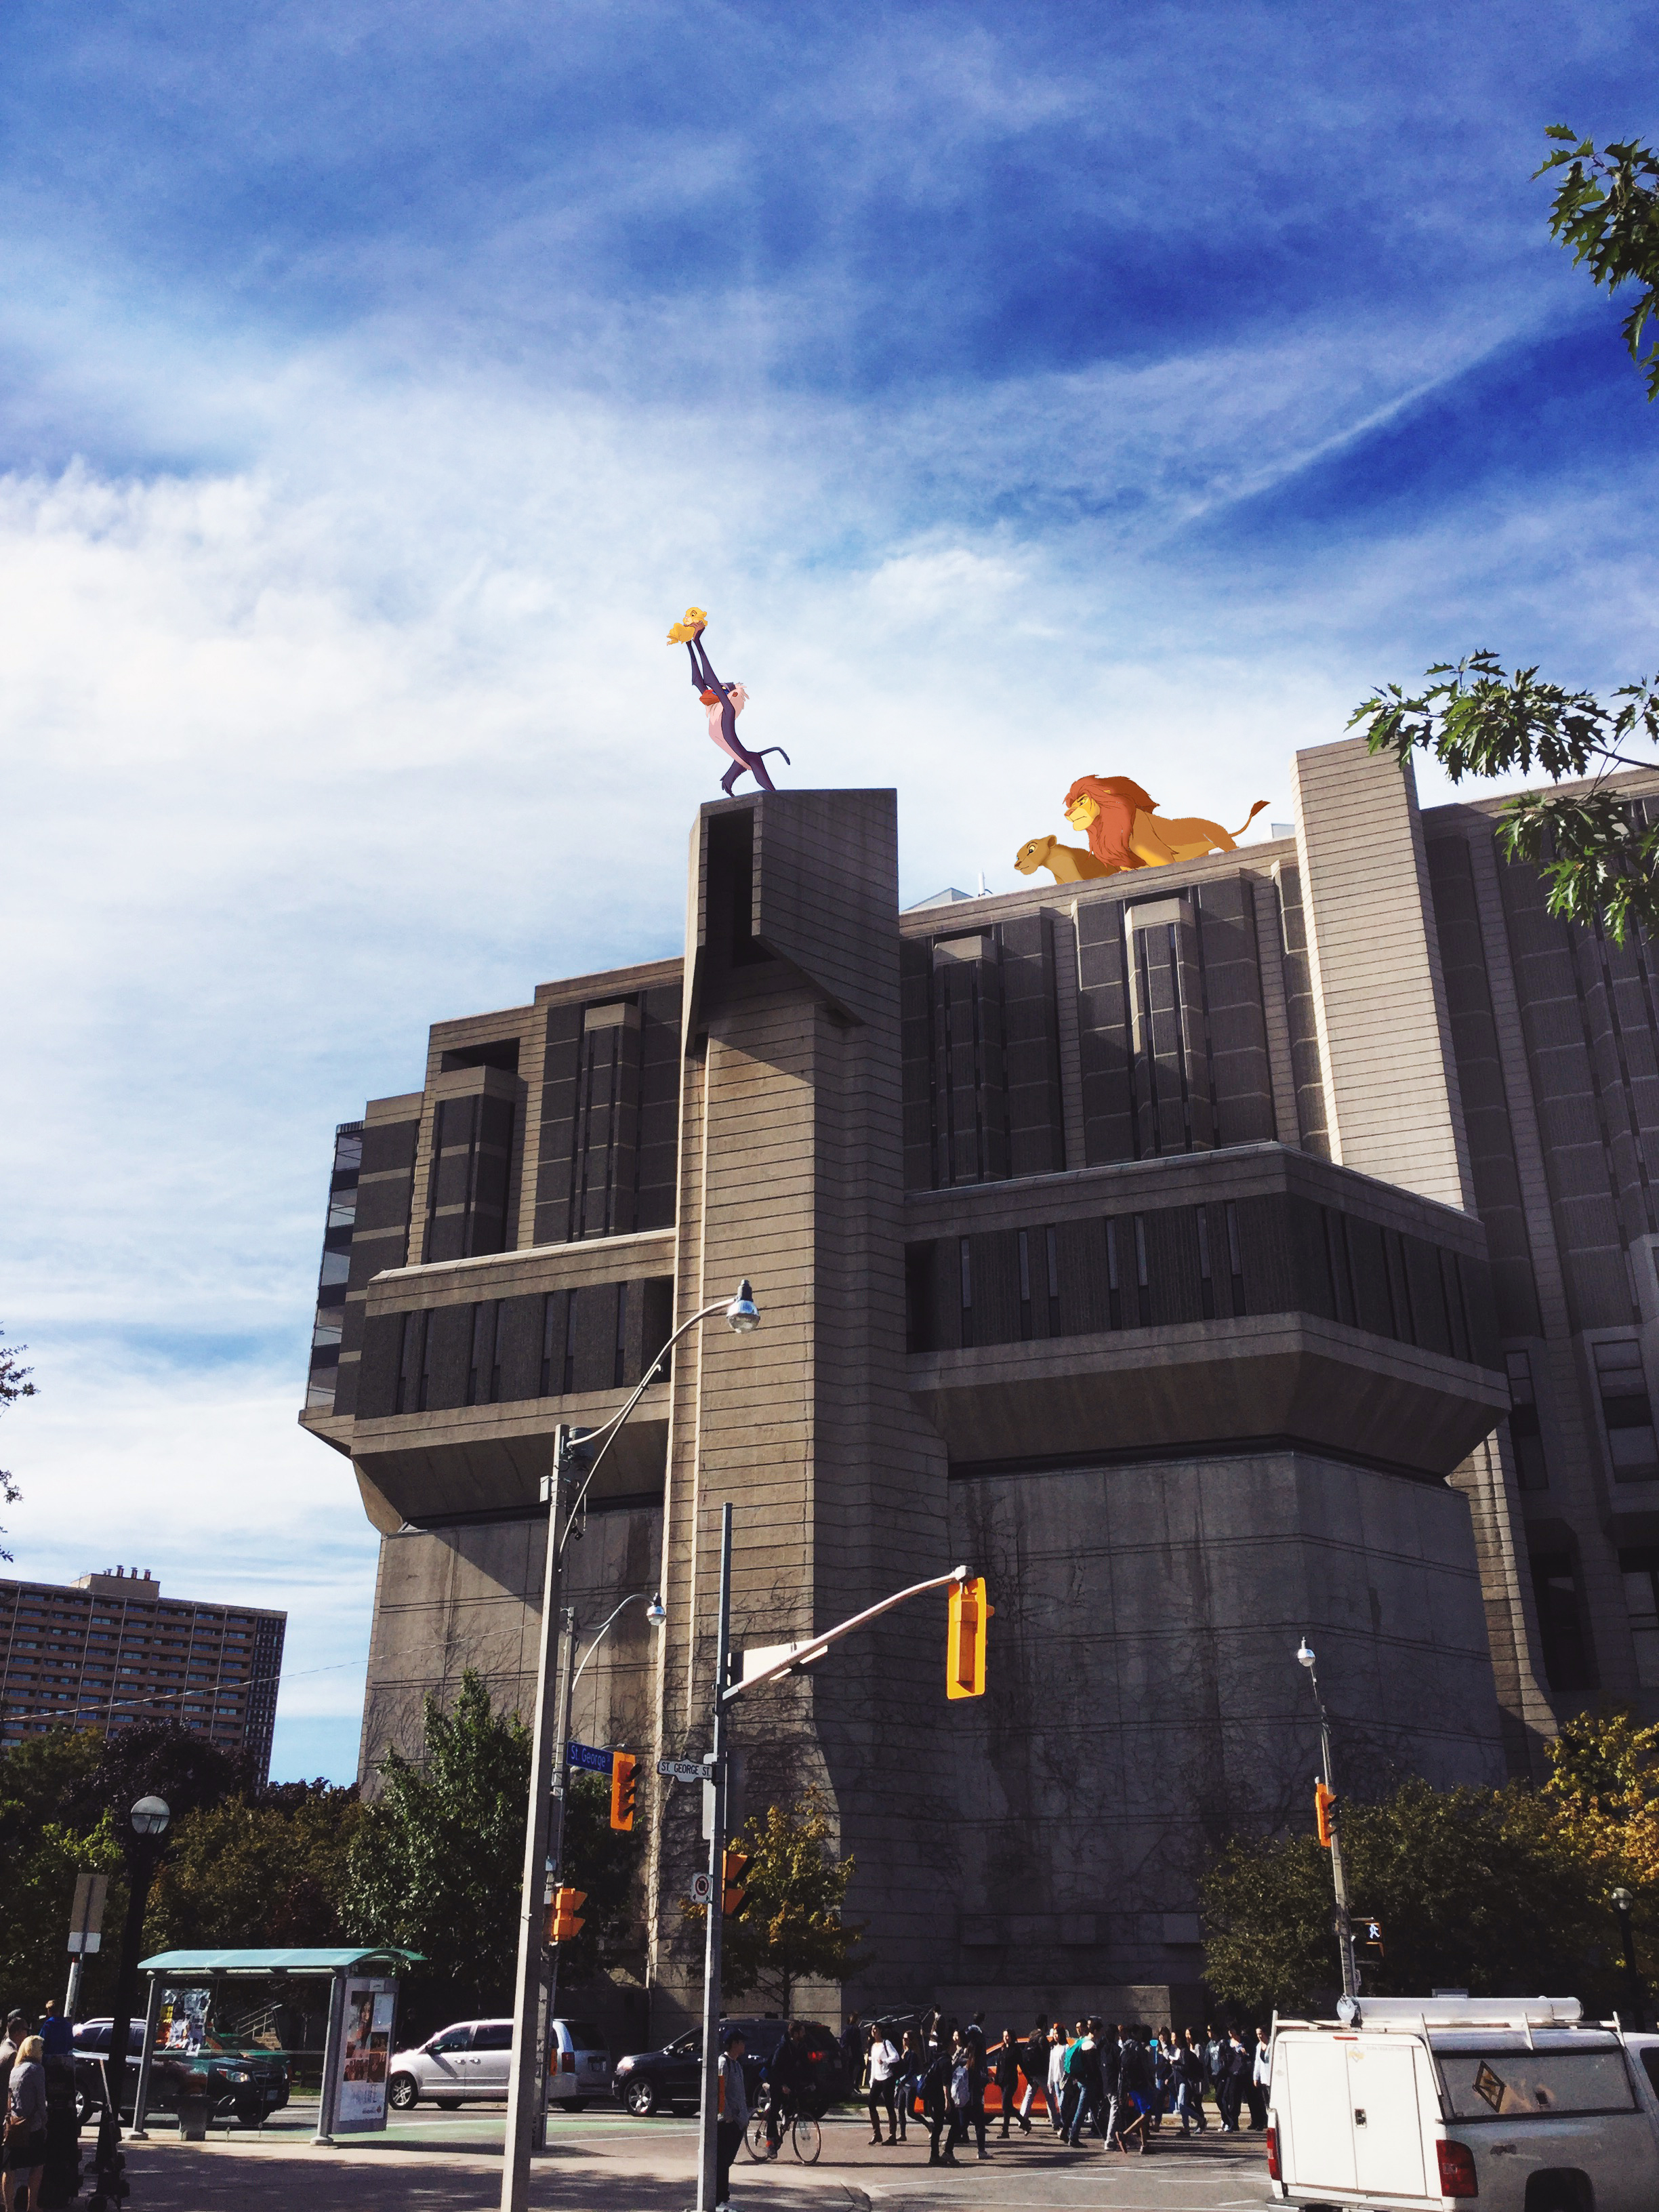 A view of Robarts, as seen from the sidewalk along St. George St. I photoshopped Rafiki and Simba into the angular edge at the top of the building, with sunlight beaming straight down on them. 